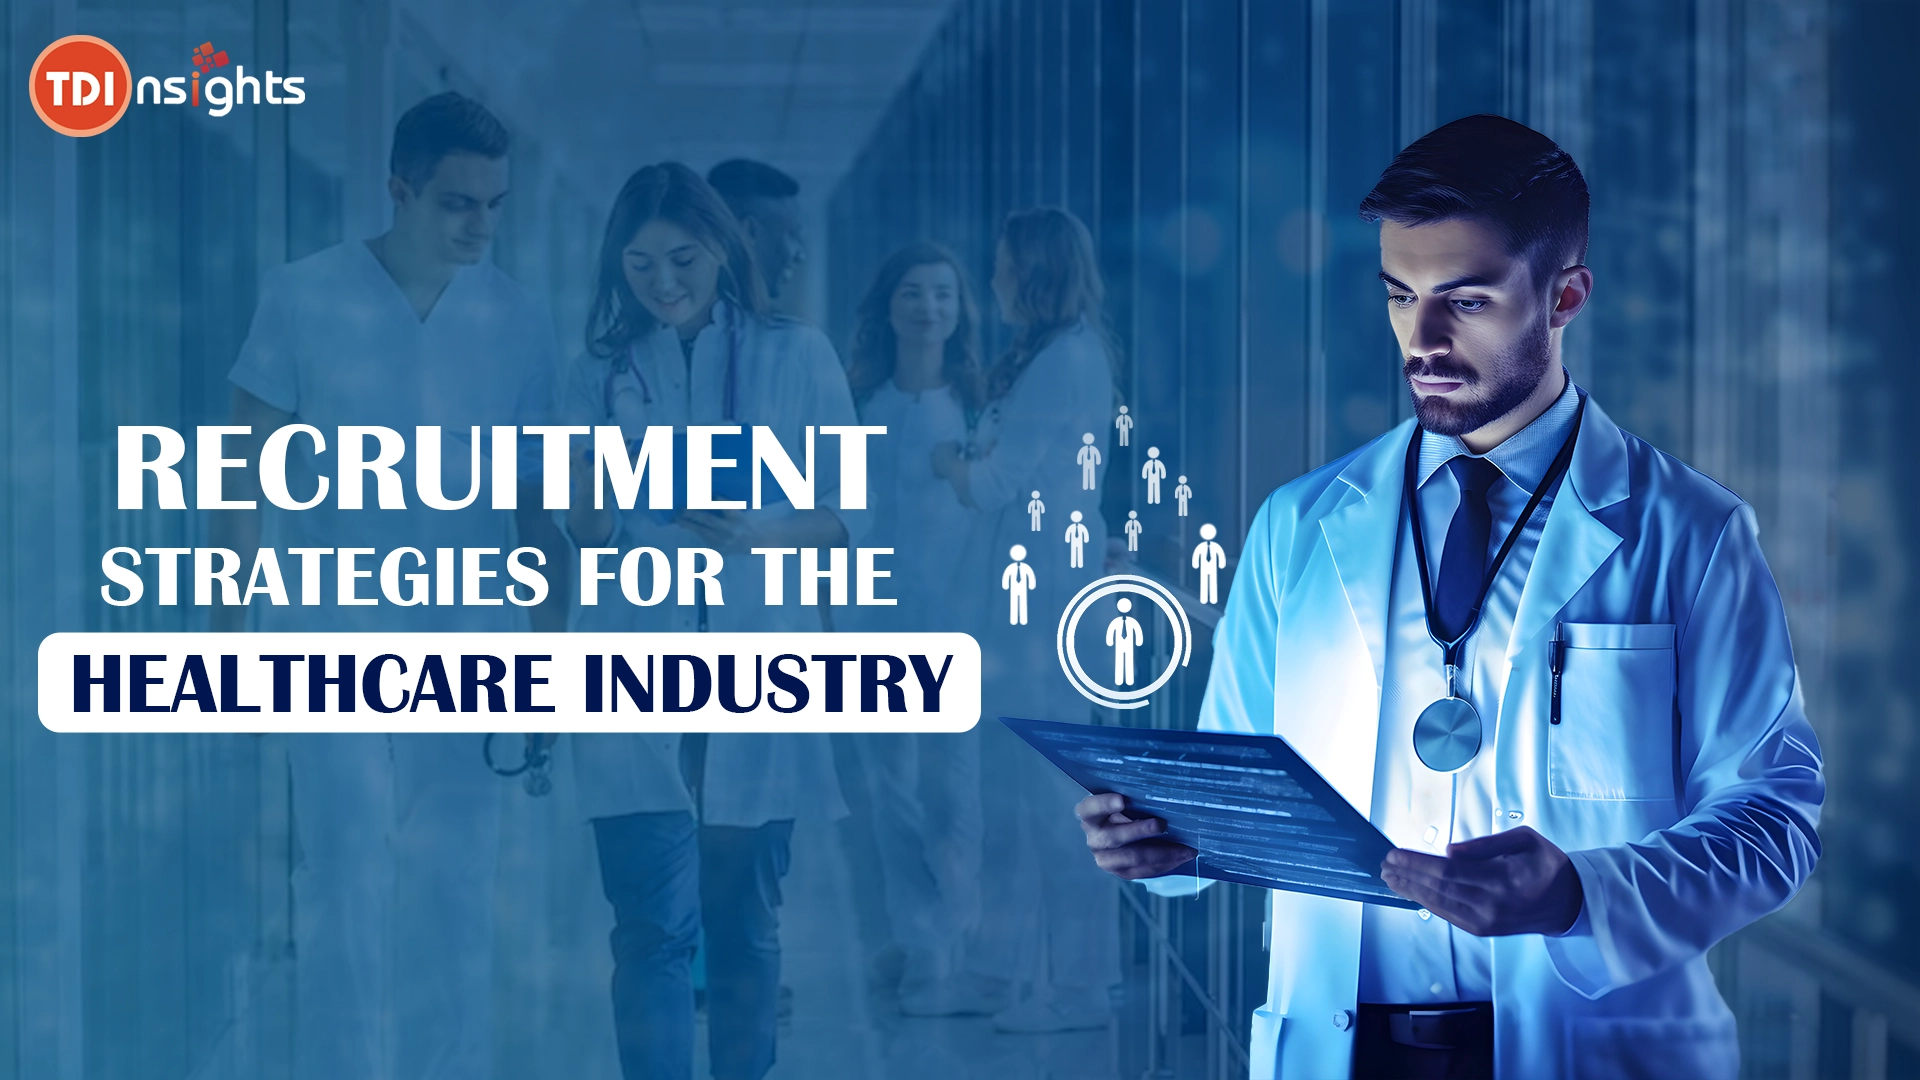 Innovative-Approaches-Recruitment-Strategies-for-the-Healthcare-Industry